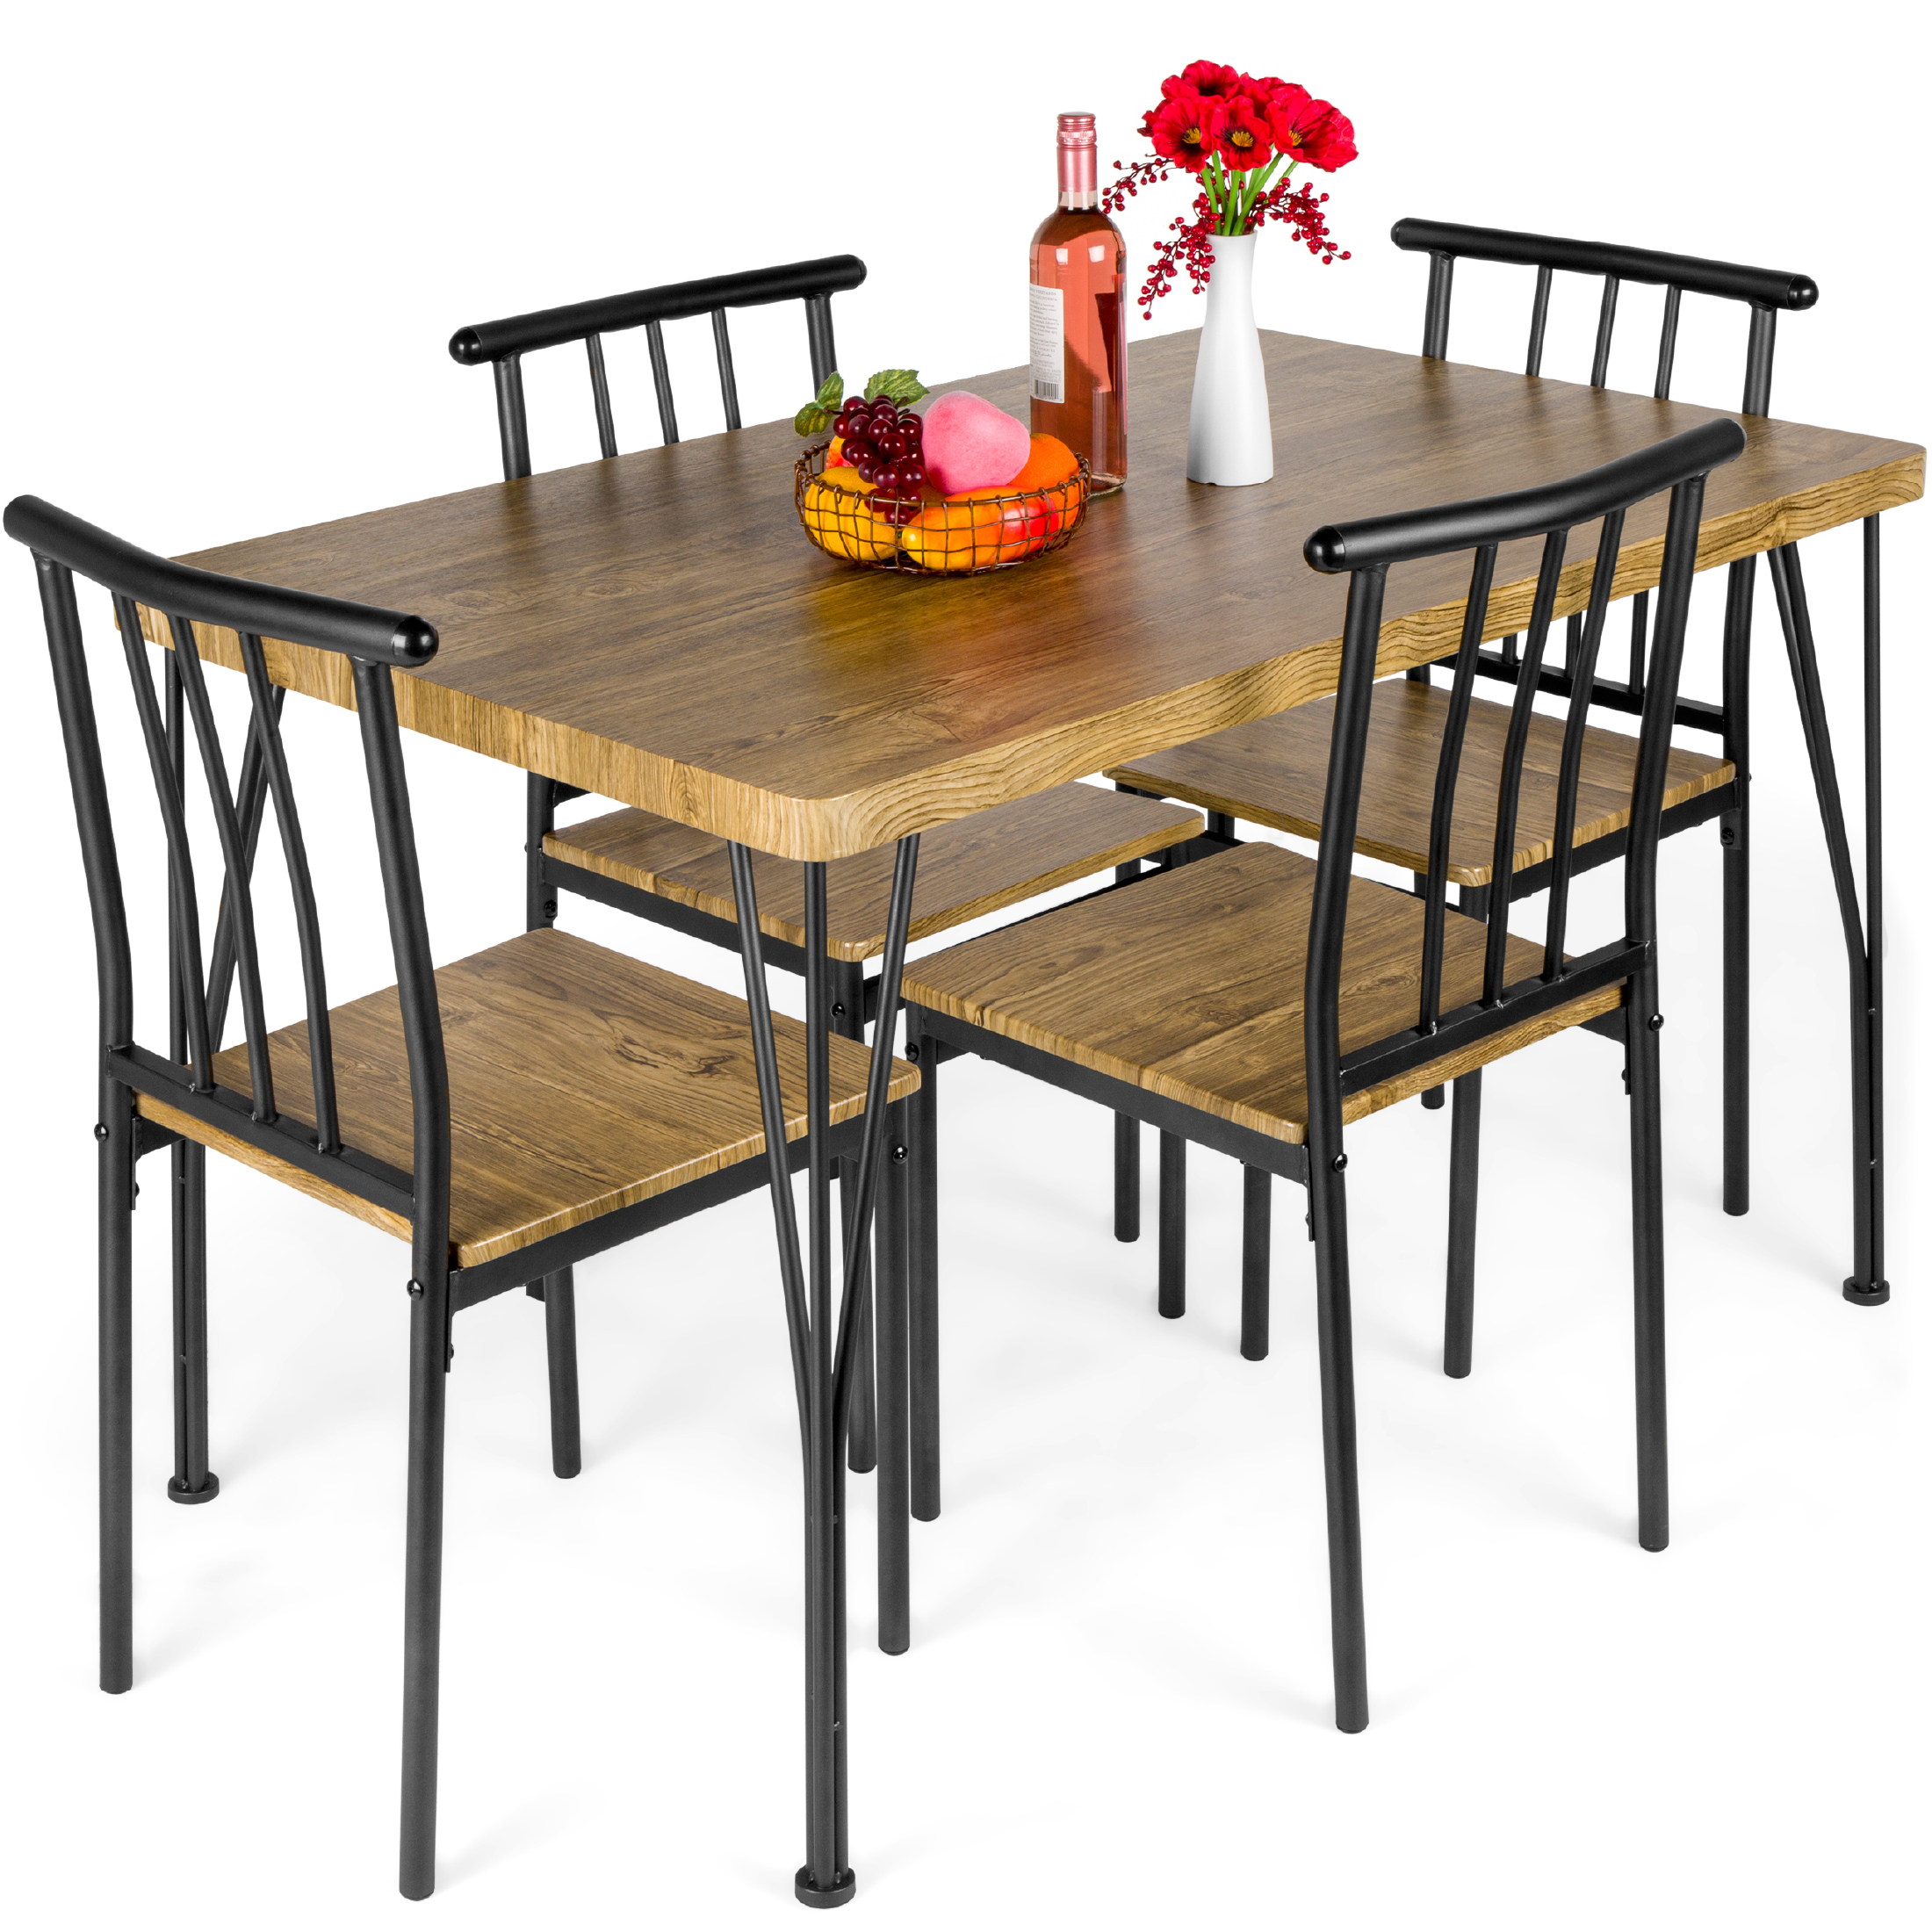 Best Choice Products 5-Piece Indoor Modern Metal Wood Rectangular Dining Table Furniture Set w/ 4 Chairs - Brown - image 1 of 7